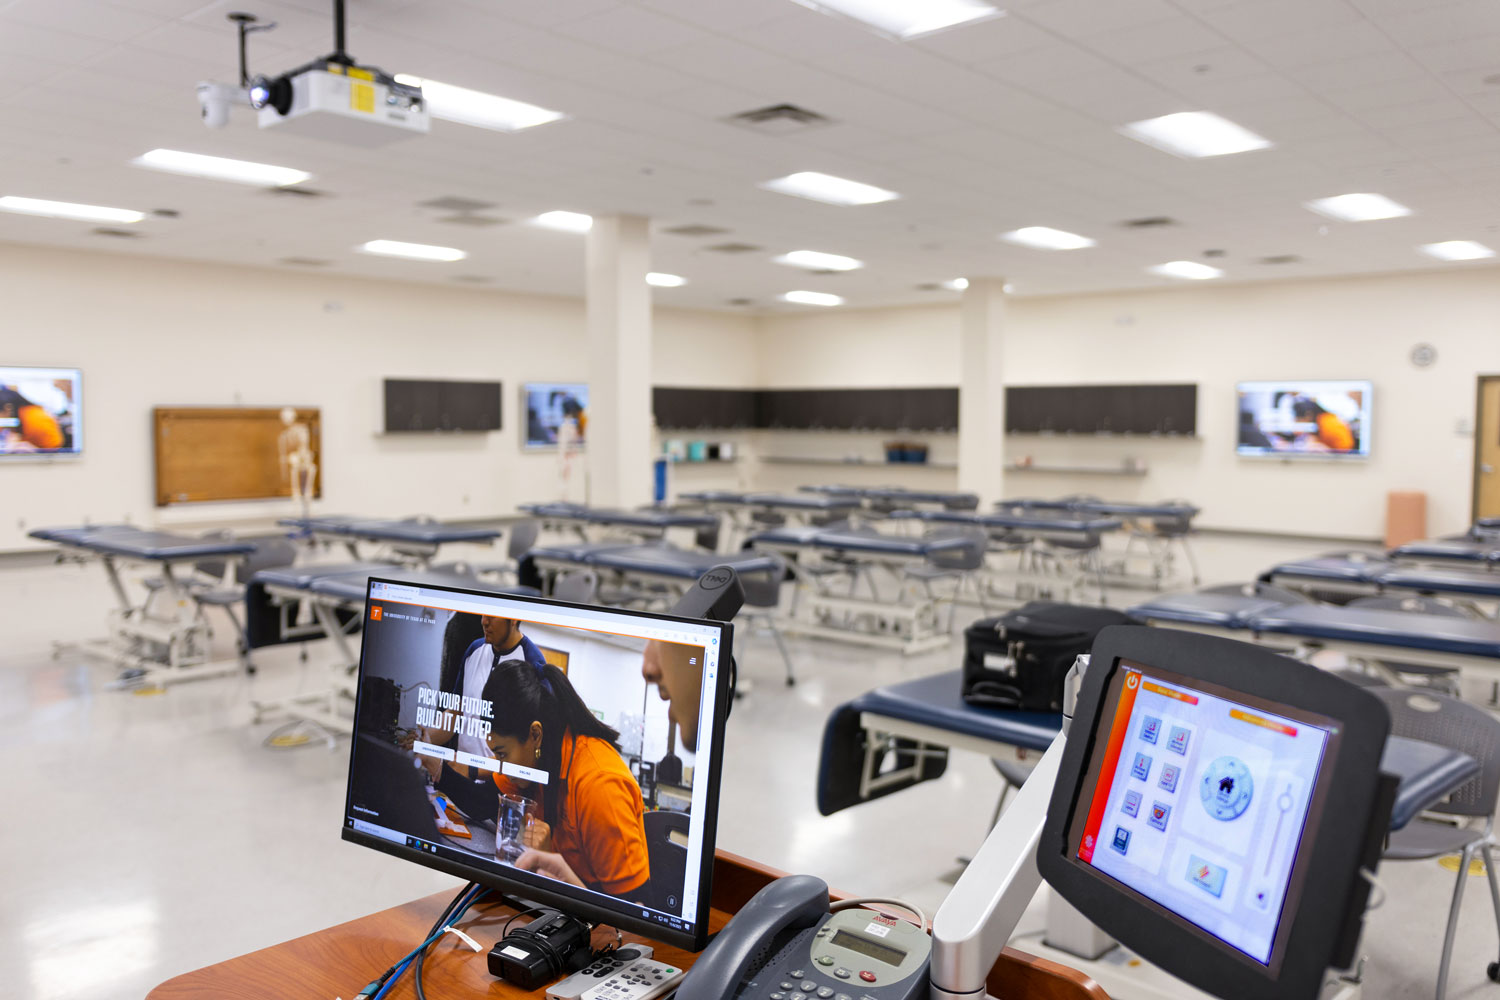 The Extron NAV system is deployed as a high-performance AV matrix solution, regardless of the room arrangement. NAV combines the flexibility of an IP‑based system with virtual video and audio switching.